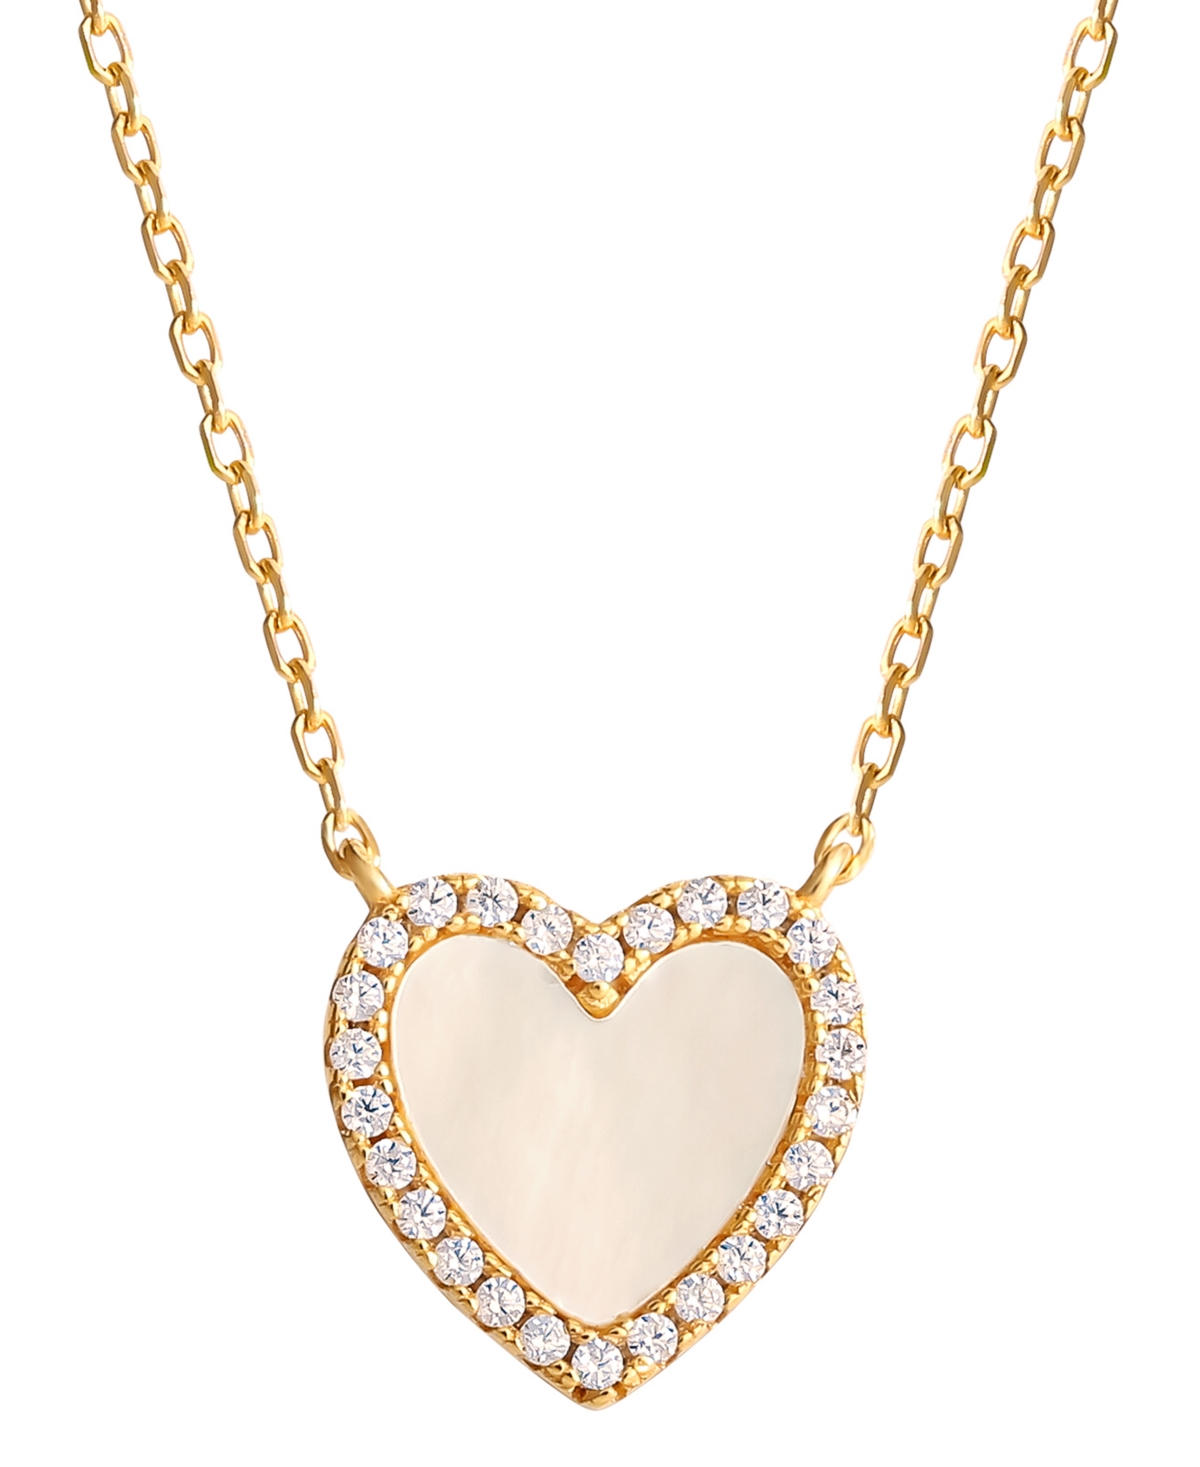 Giani Bernini Mother Of Pearl & Cubic Zirconia Heart Halo Pendant Necklace In 18k Gold-plated Sterling Silver, 16"